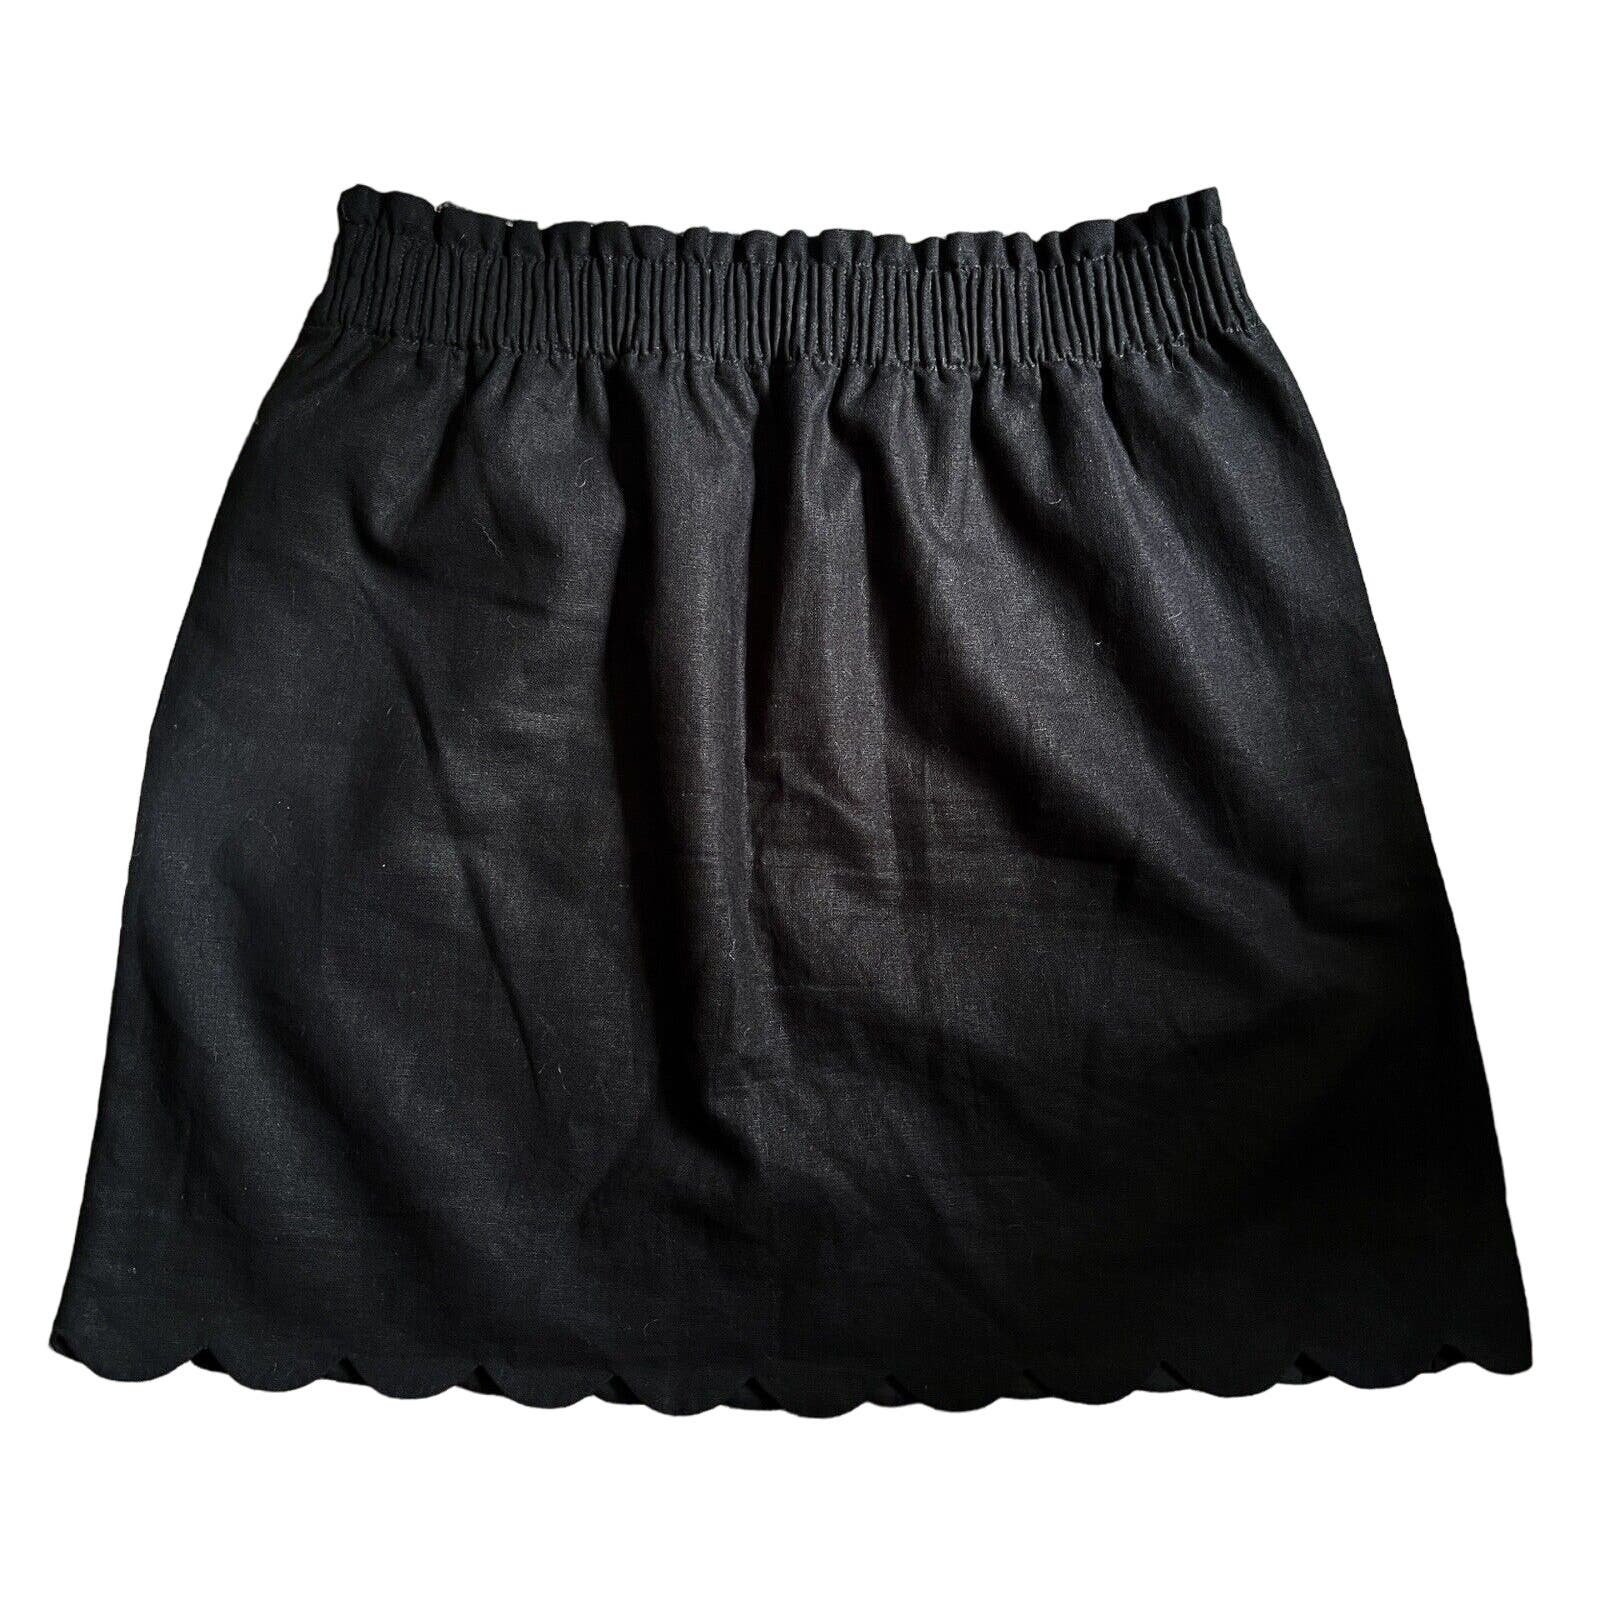 large discount J. Crew Linen Blend Skirt, Black, Size 6, Scalloped Edge, Lined, EUC PME4gHdtw for sale